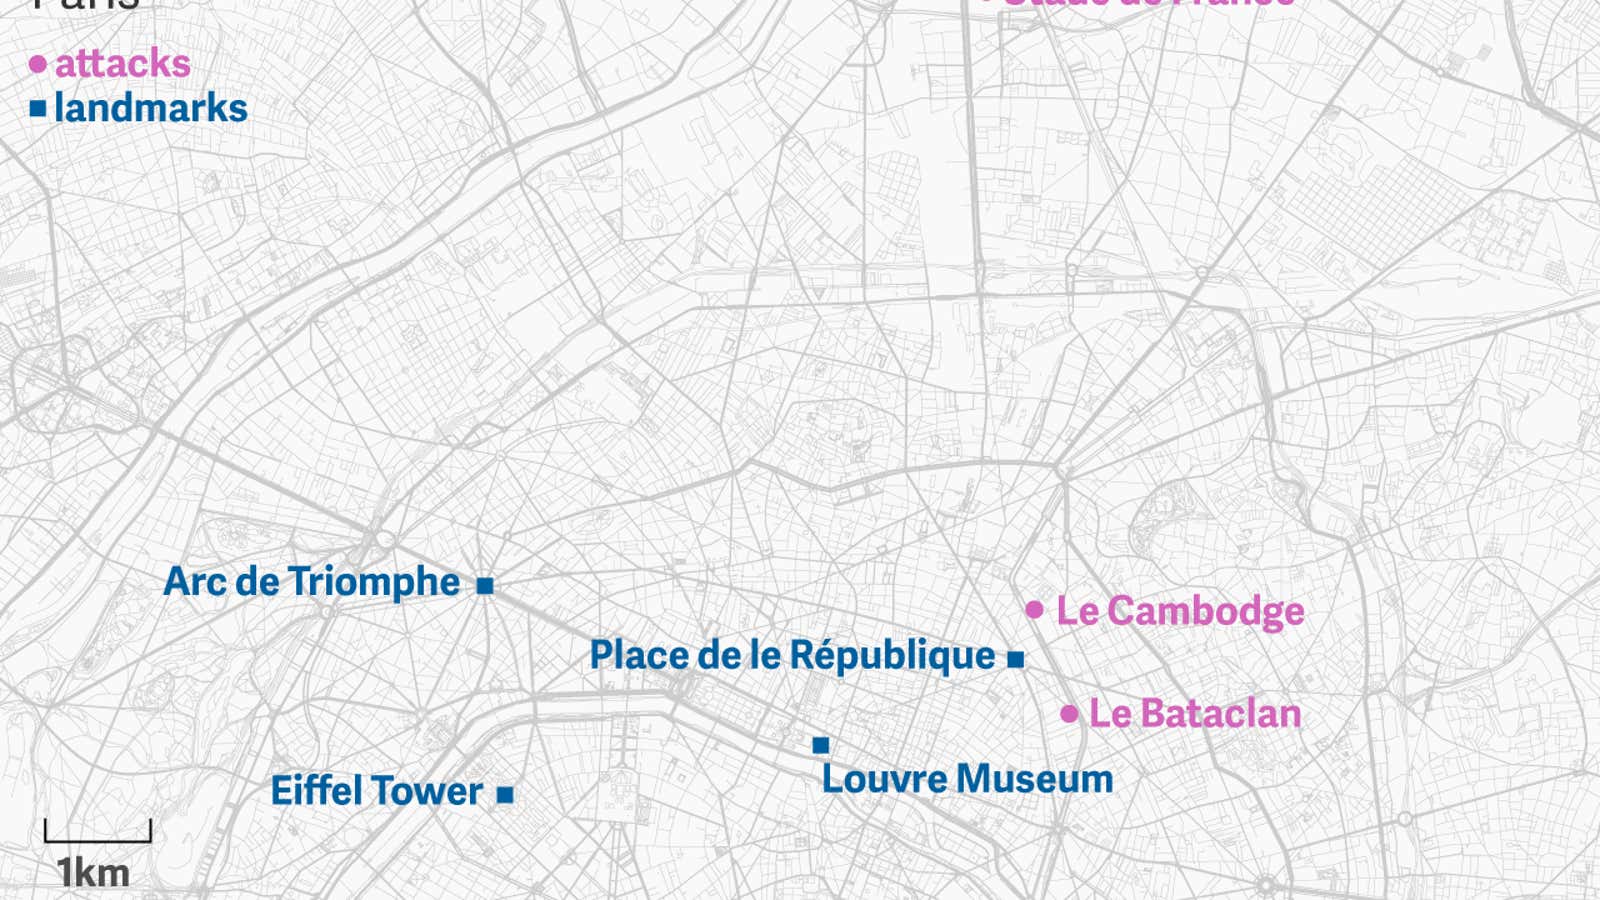 These are the locations of the attacks in Paris